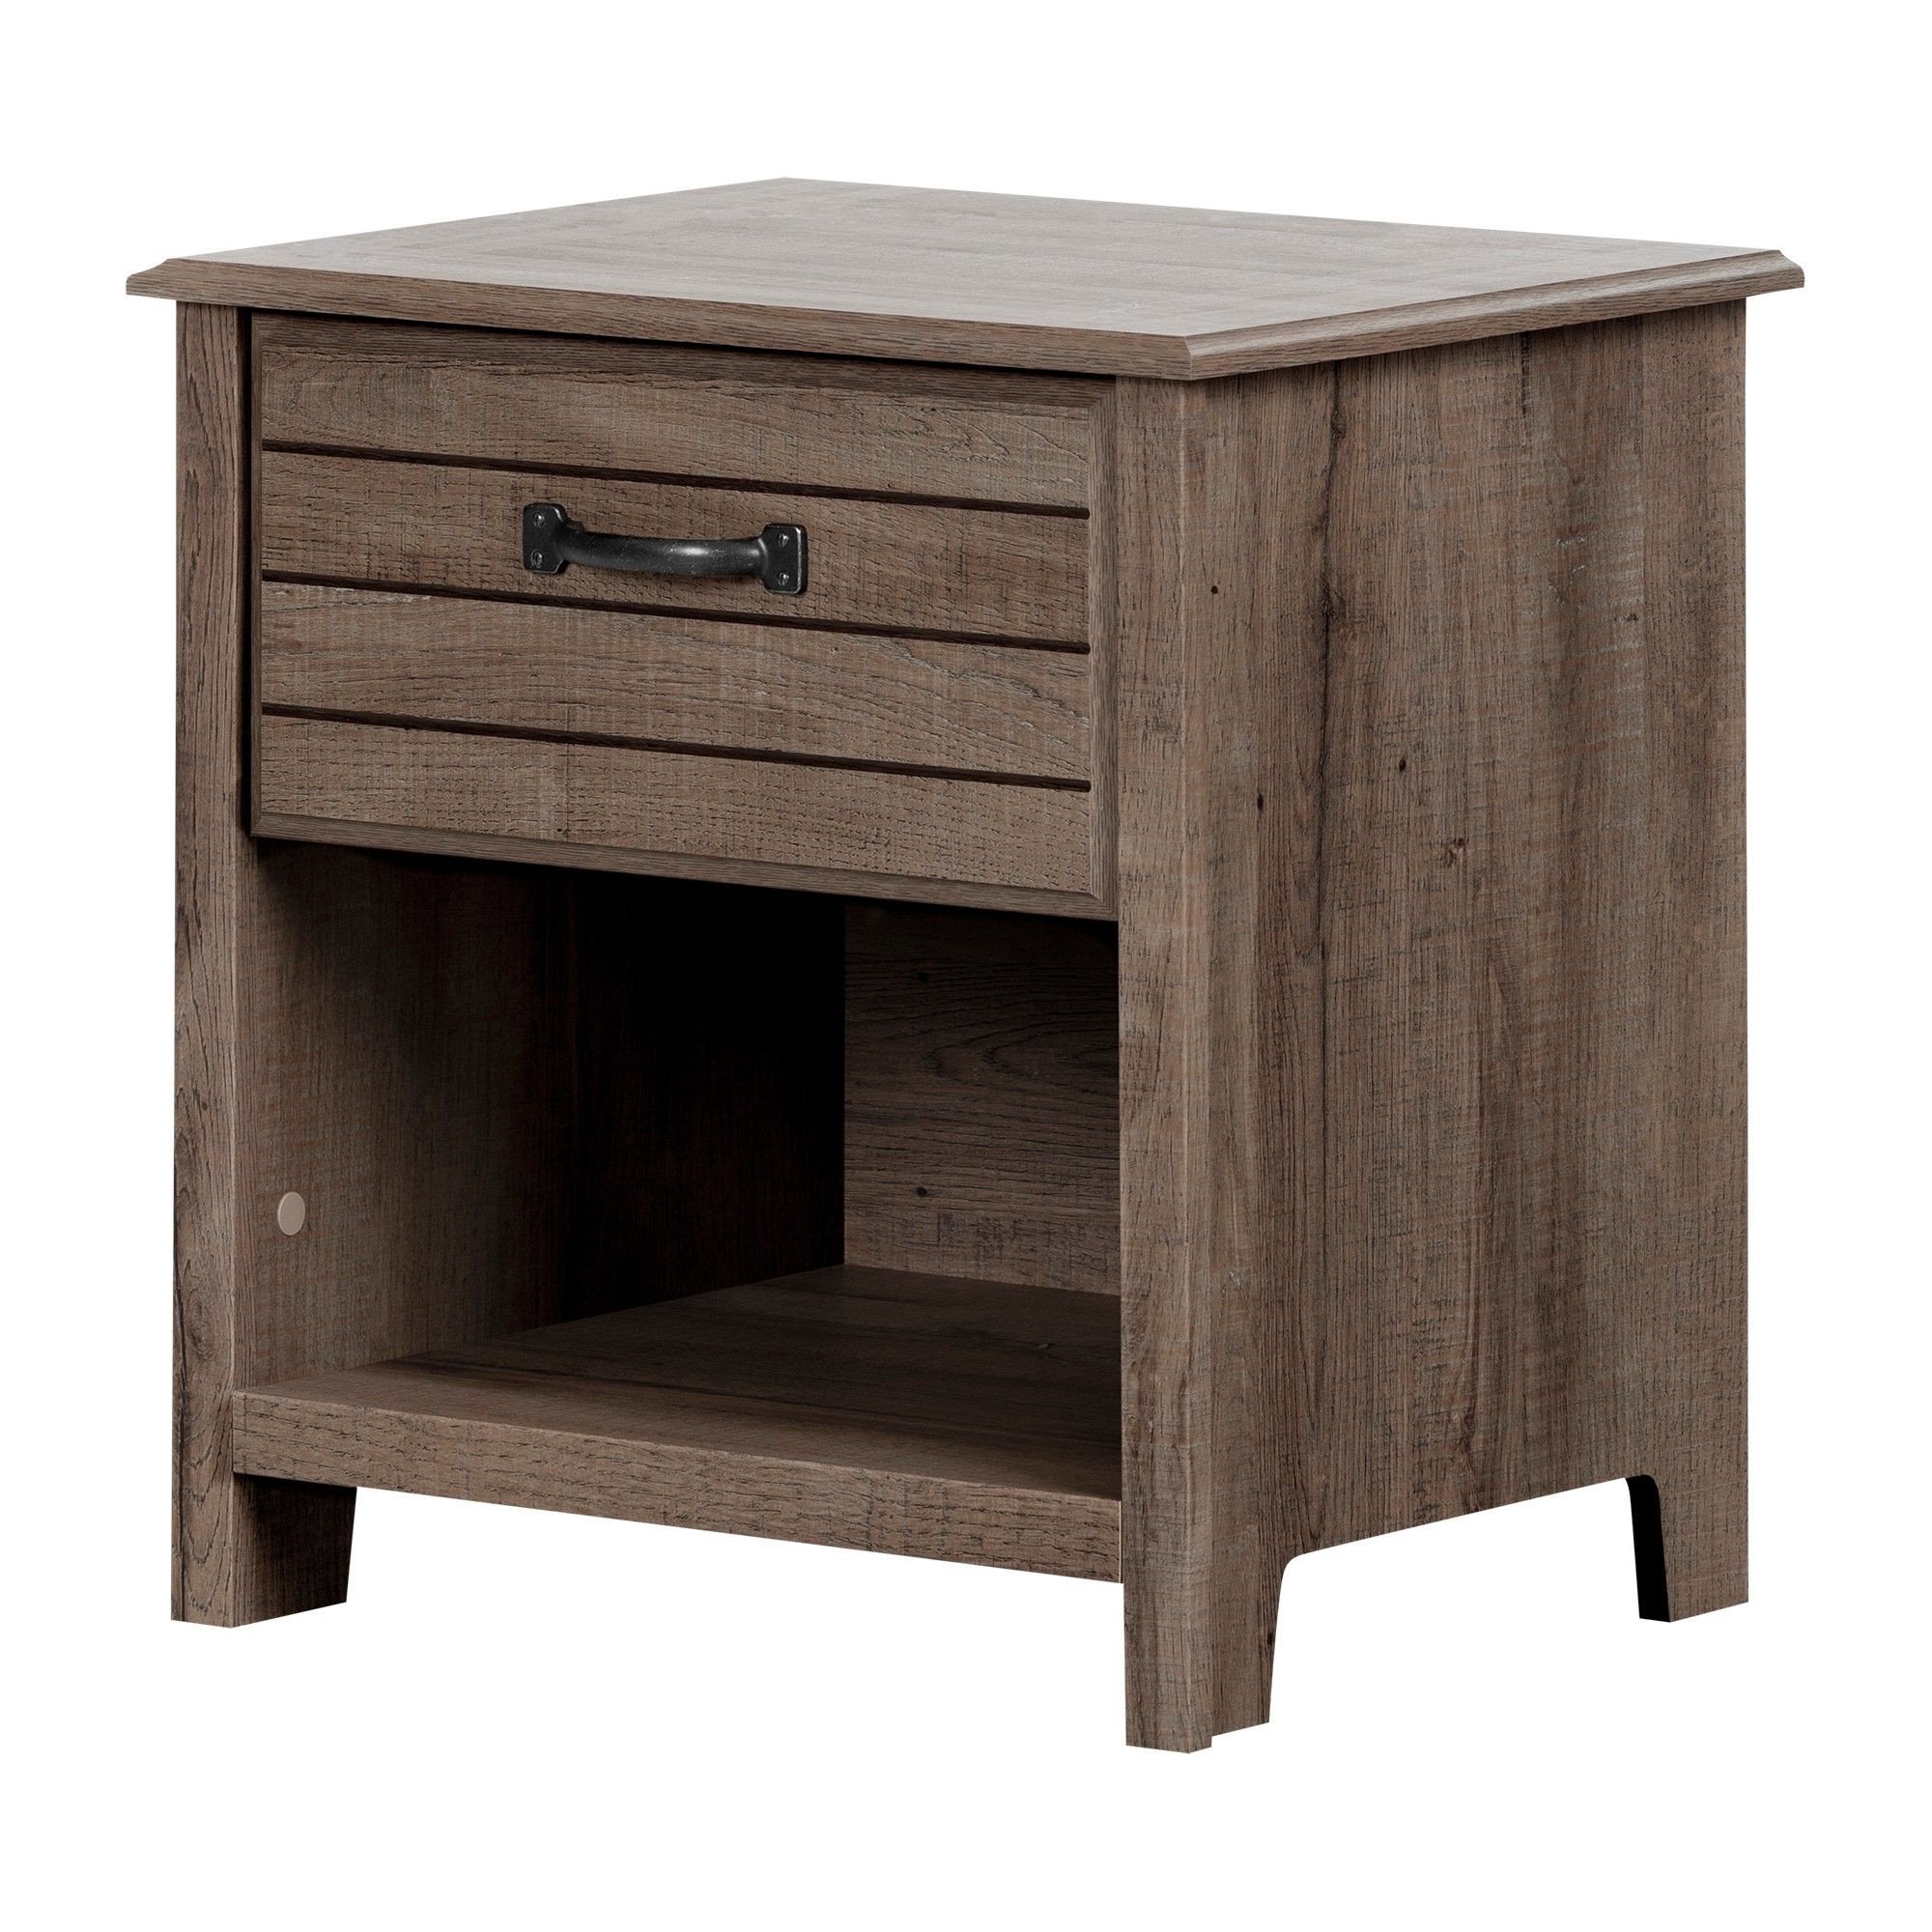 End Tables for Bedroom New Ulysses 1 Drawer Nightstand Fall Oak south Shore Fall